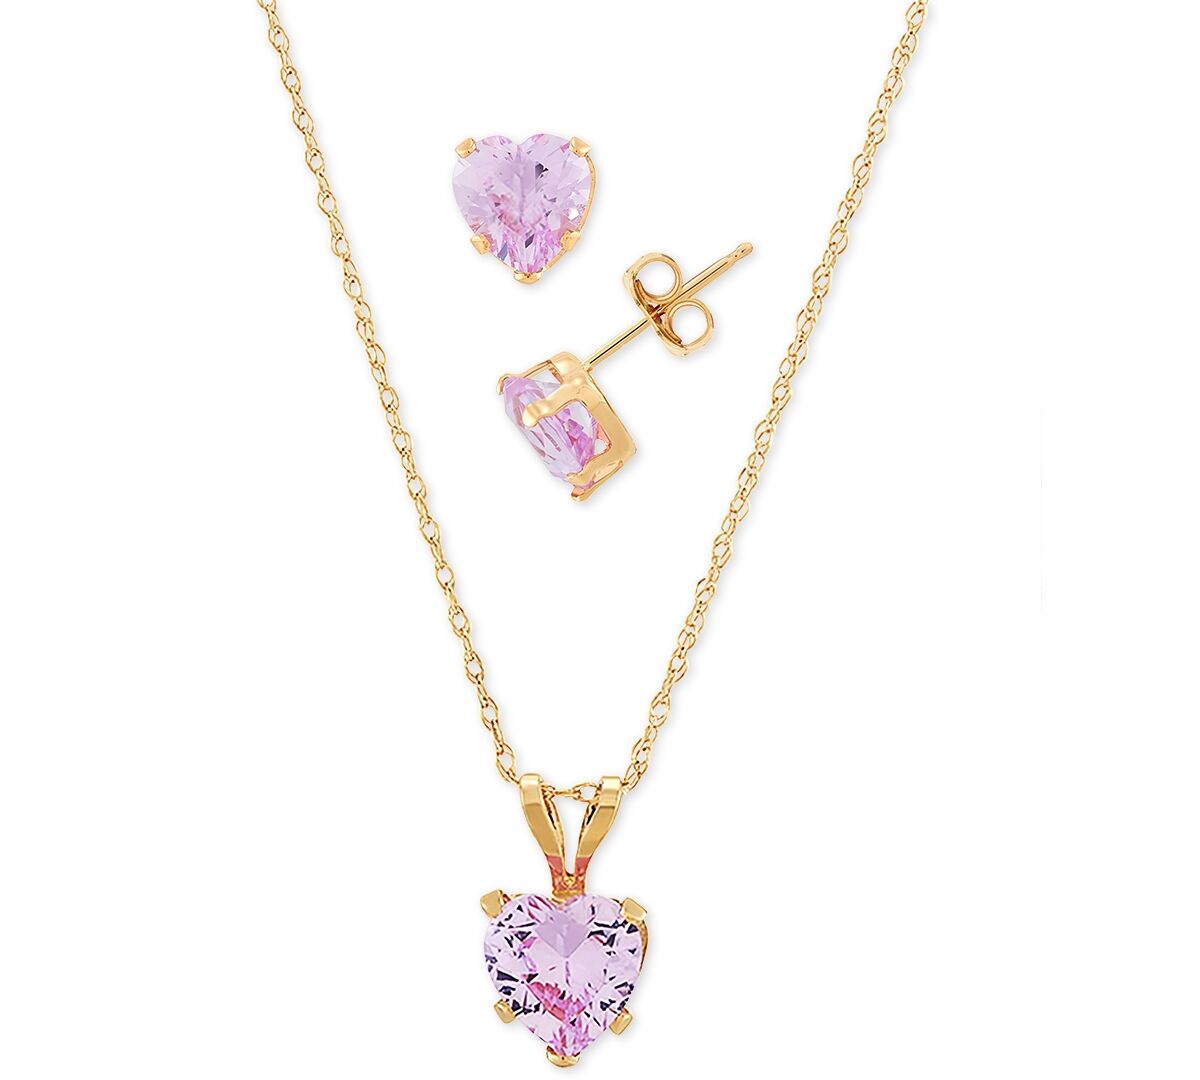 Macy's 2-Pc. Set Lab-Created Pink Sapphire Heart Pendant Necklace & Matching Stud Earrings (3-1/6 ct. t.w.) in 10k Gold - Pink Sapphire